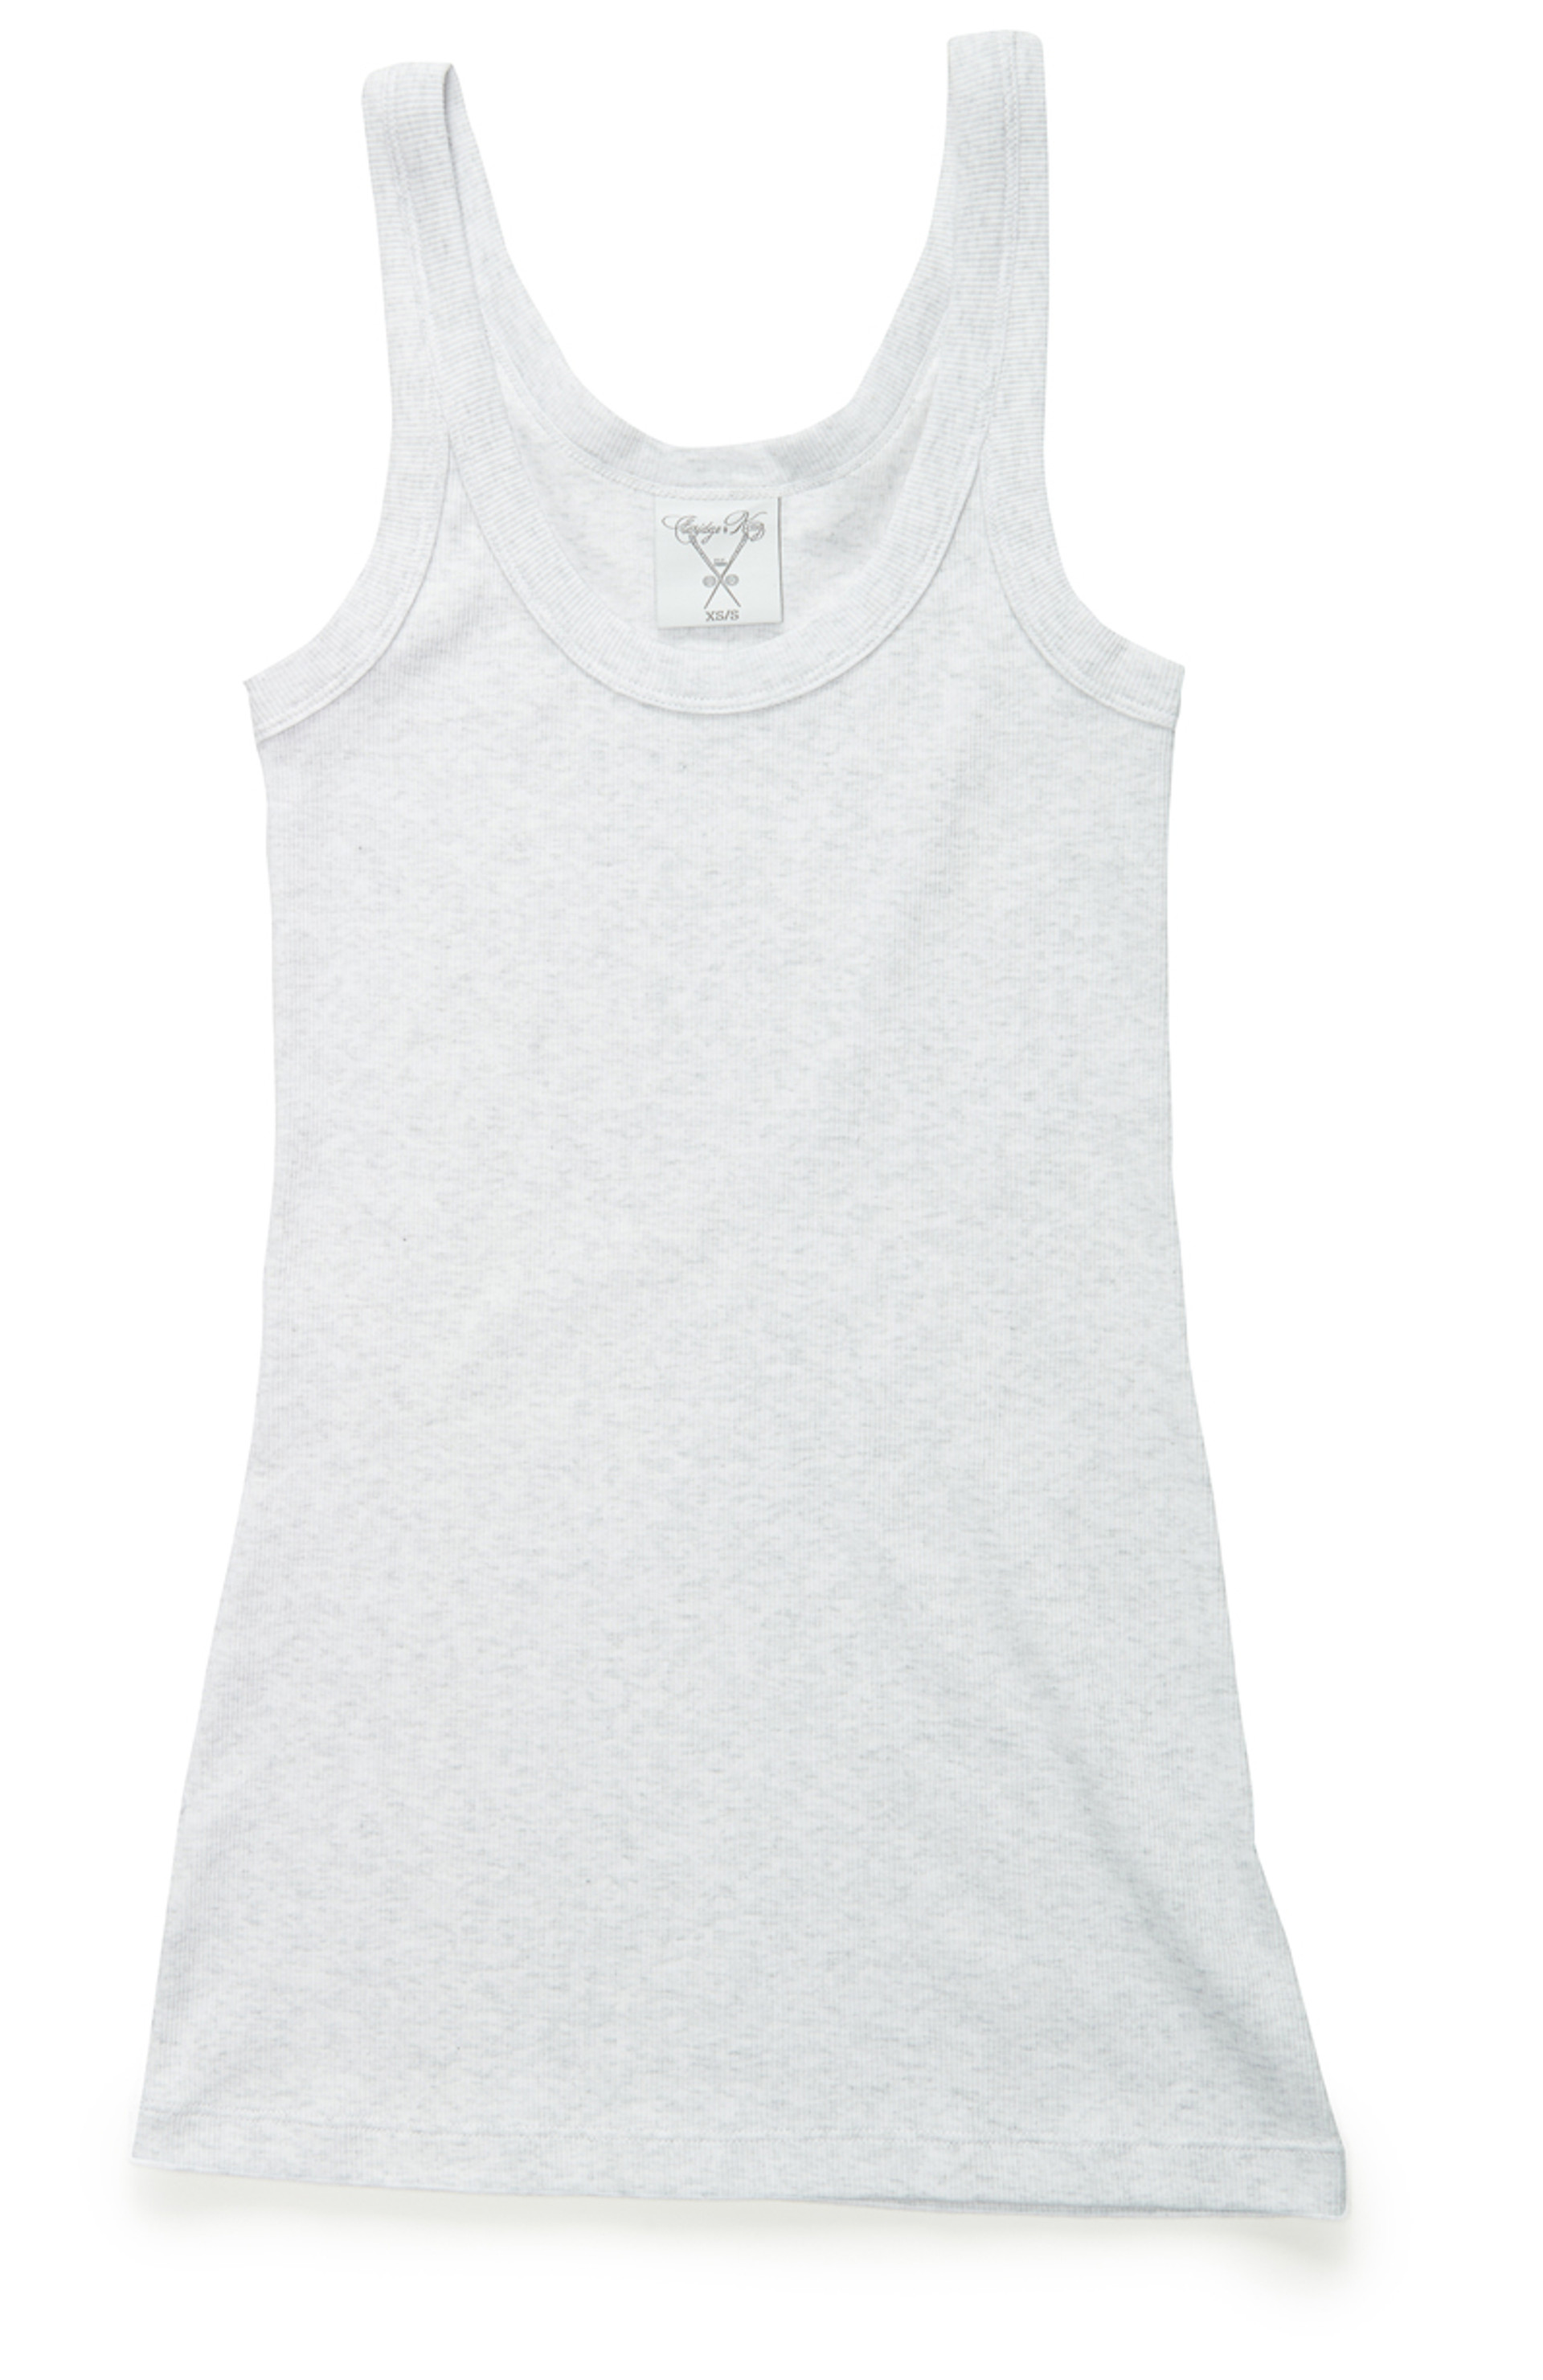 The Undershirt, Our Menswear Take on His Basics Underpinning | Looks ...